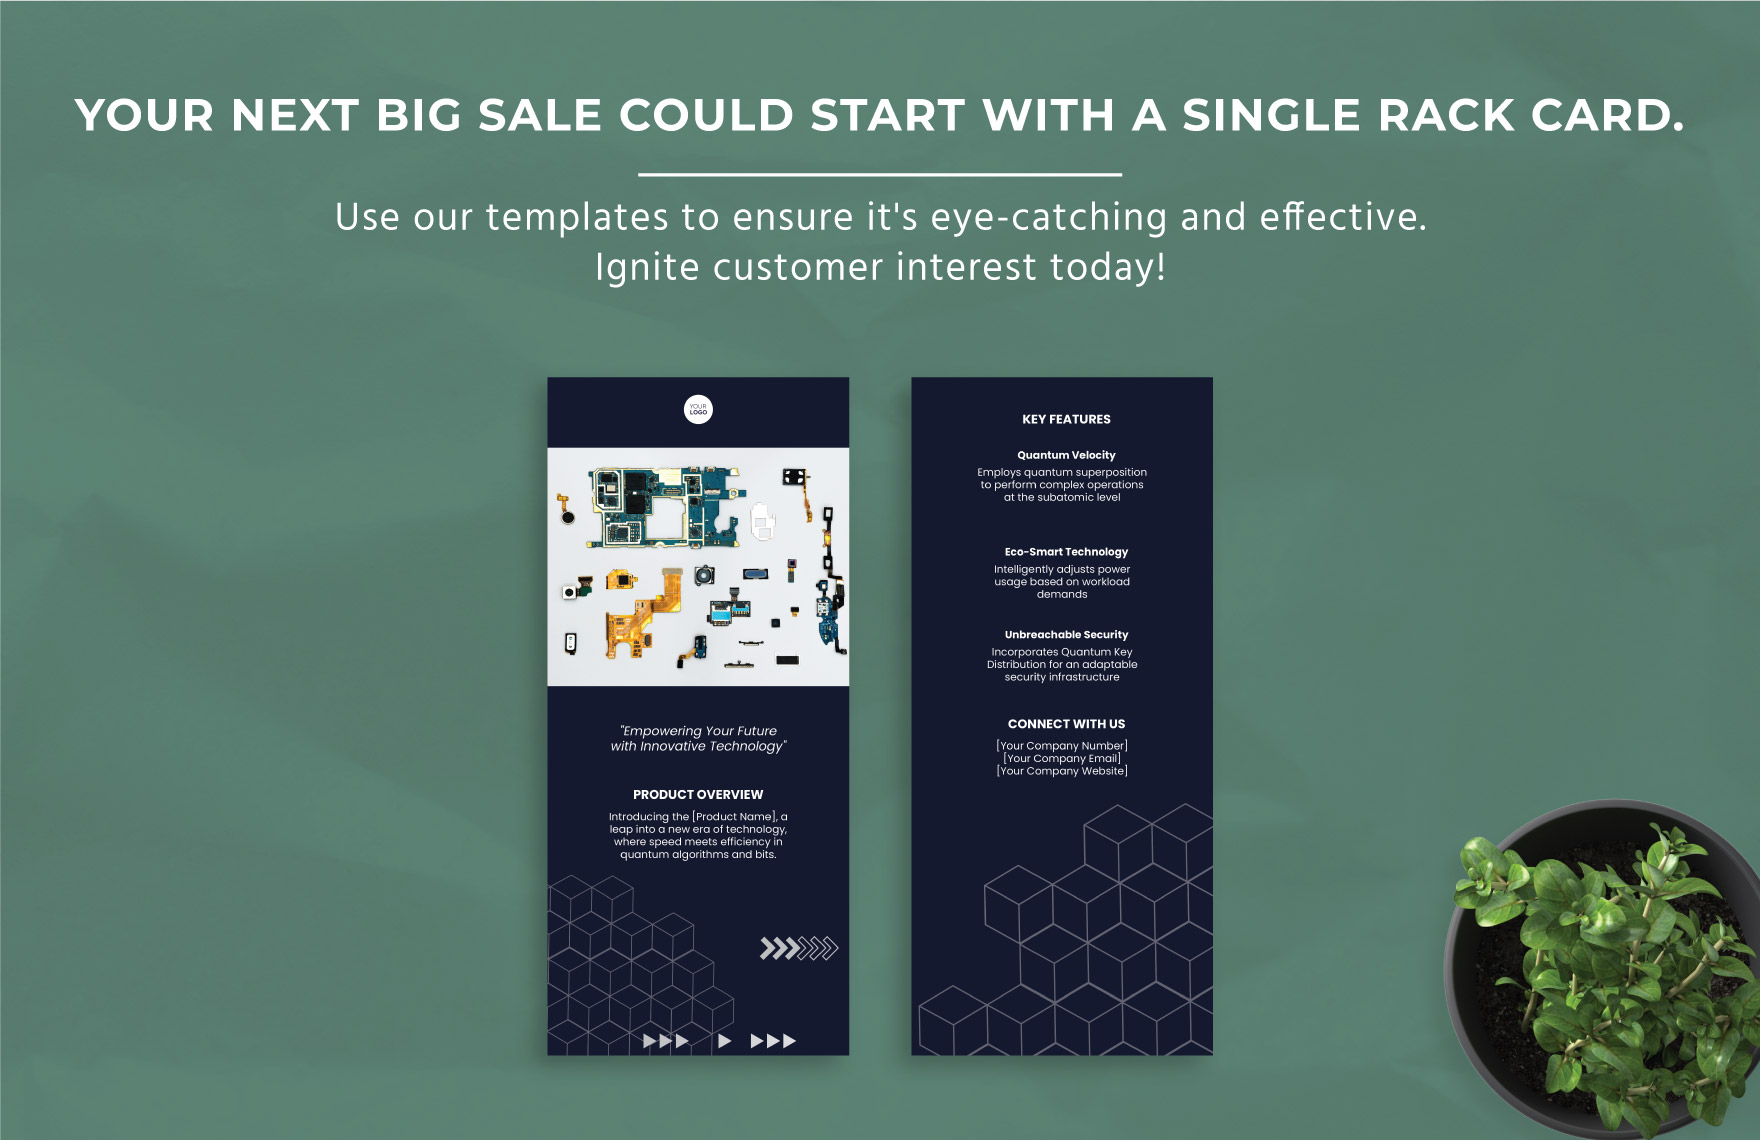 Sales New Product Rack Card Template